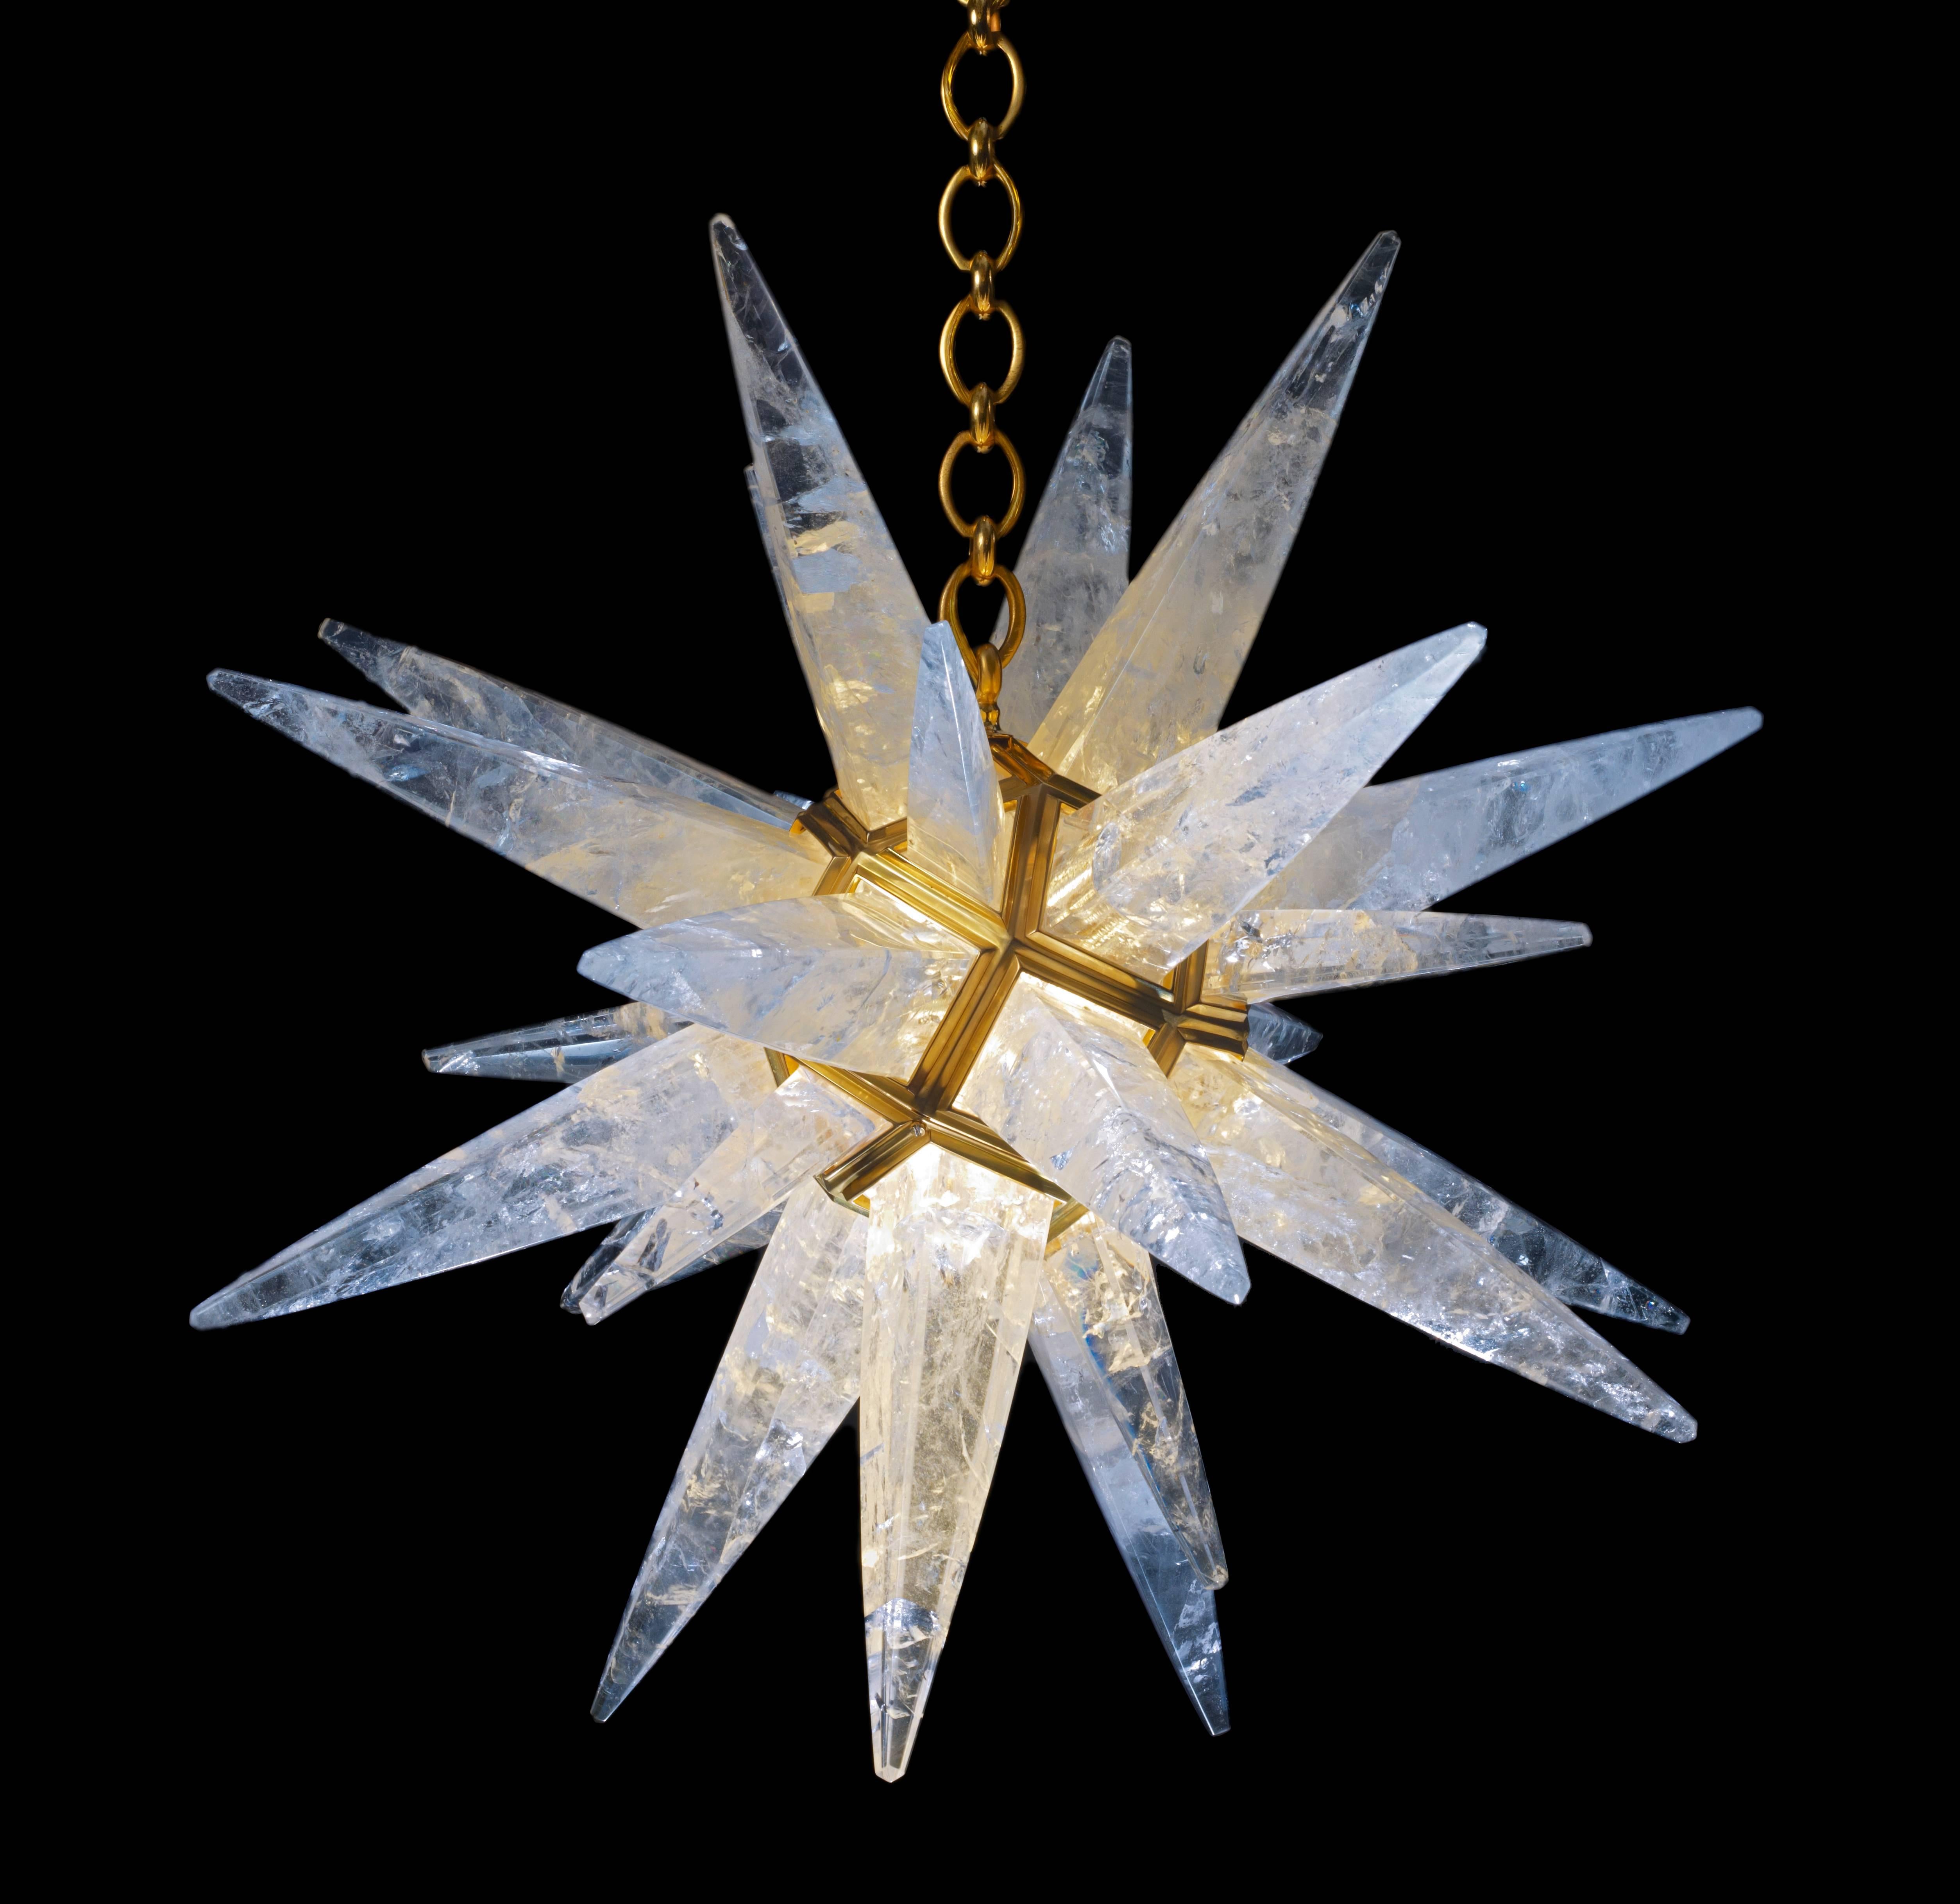 Exclusive rock crystal star chandeliers set. Rock crystal star I and rock crystal quartz star III chandeliers. Rock crystal star I measures: 30 inches diameter. Rock crystal star III measures: 18 inches diameter. You can also create your own sky of